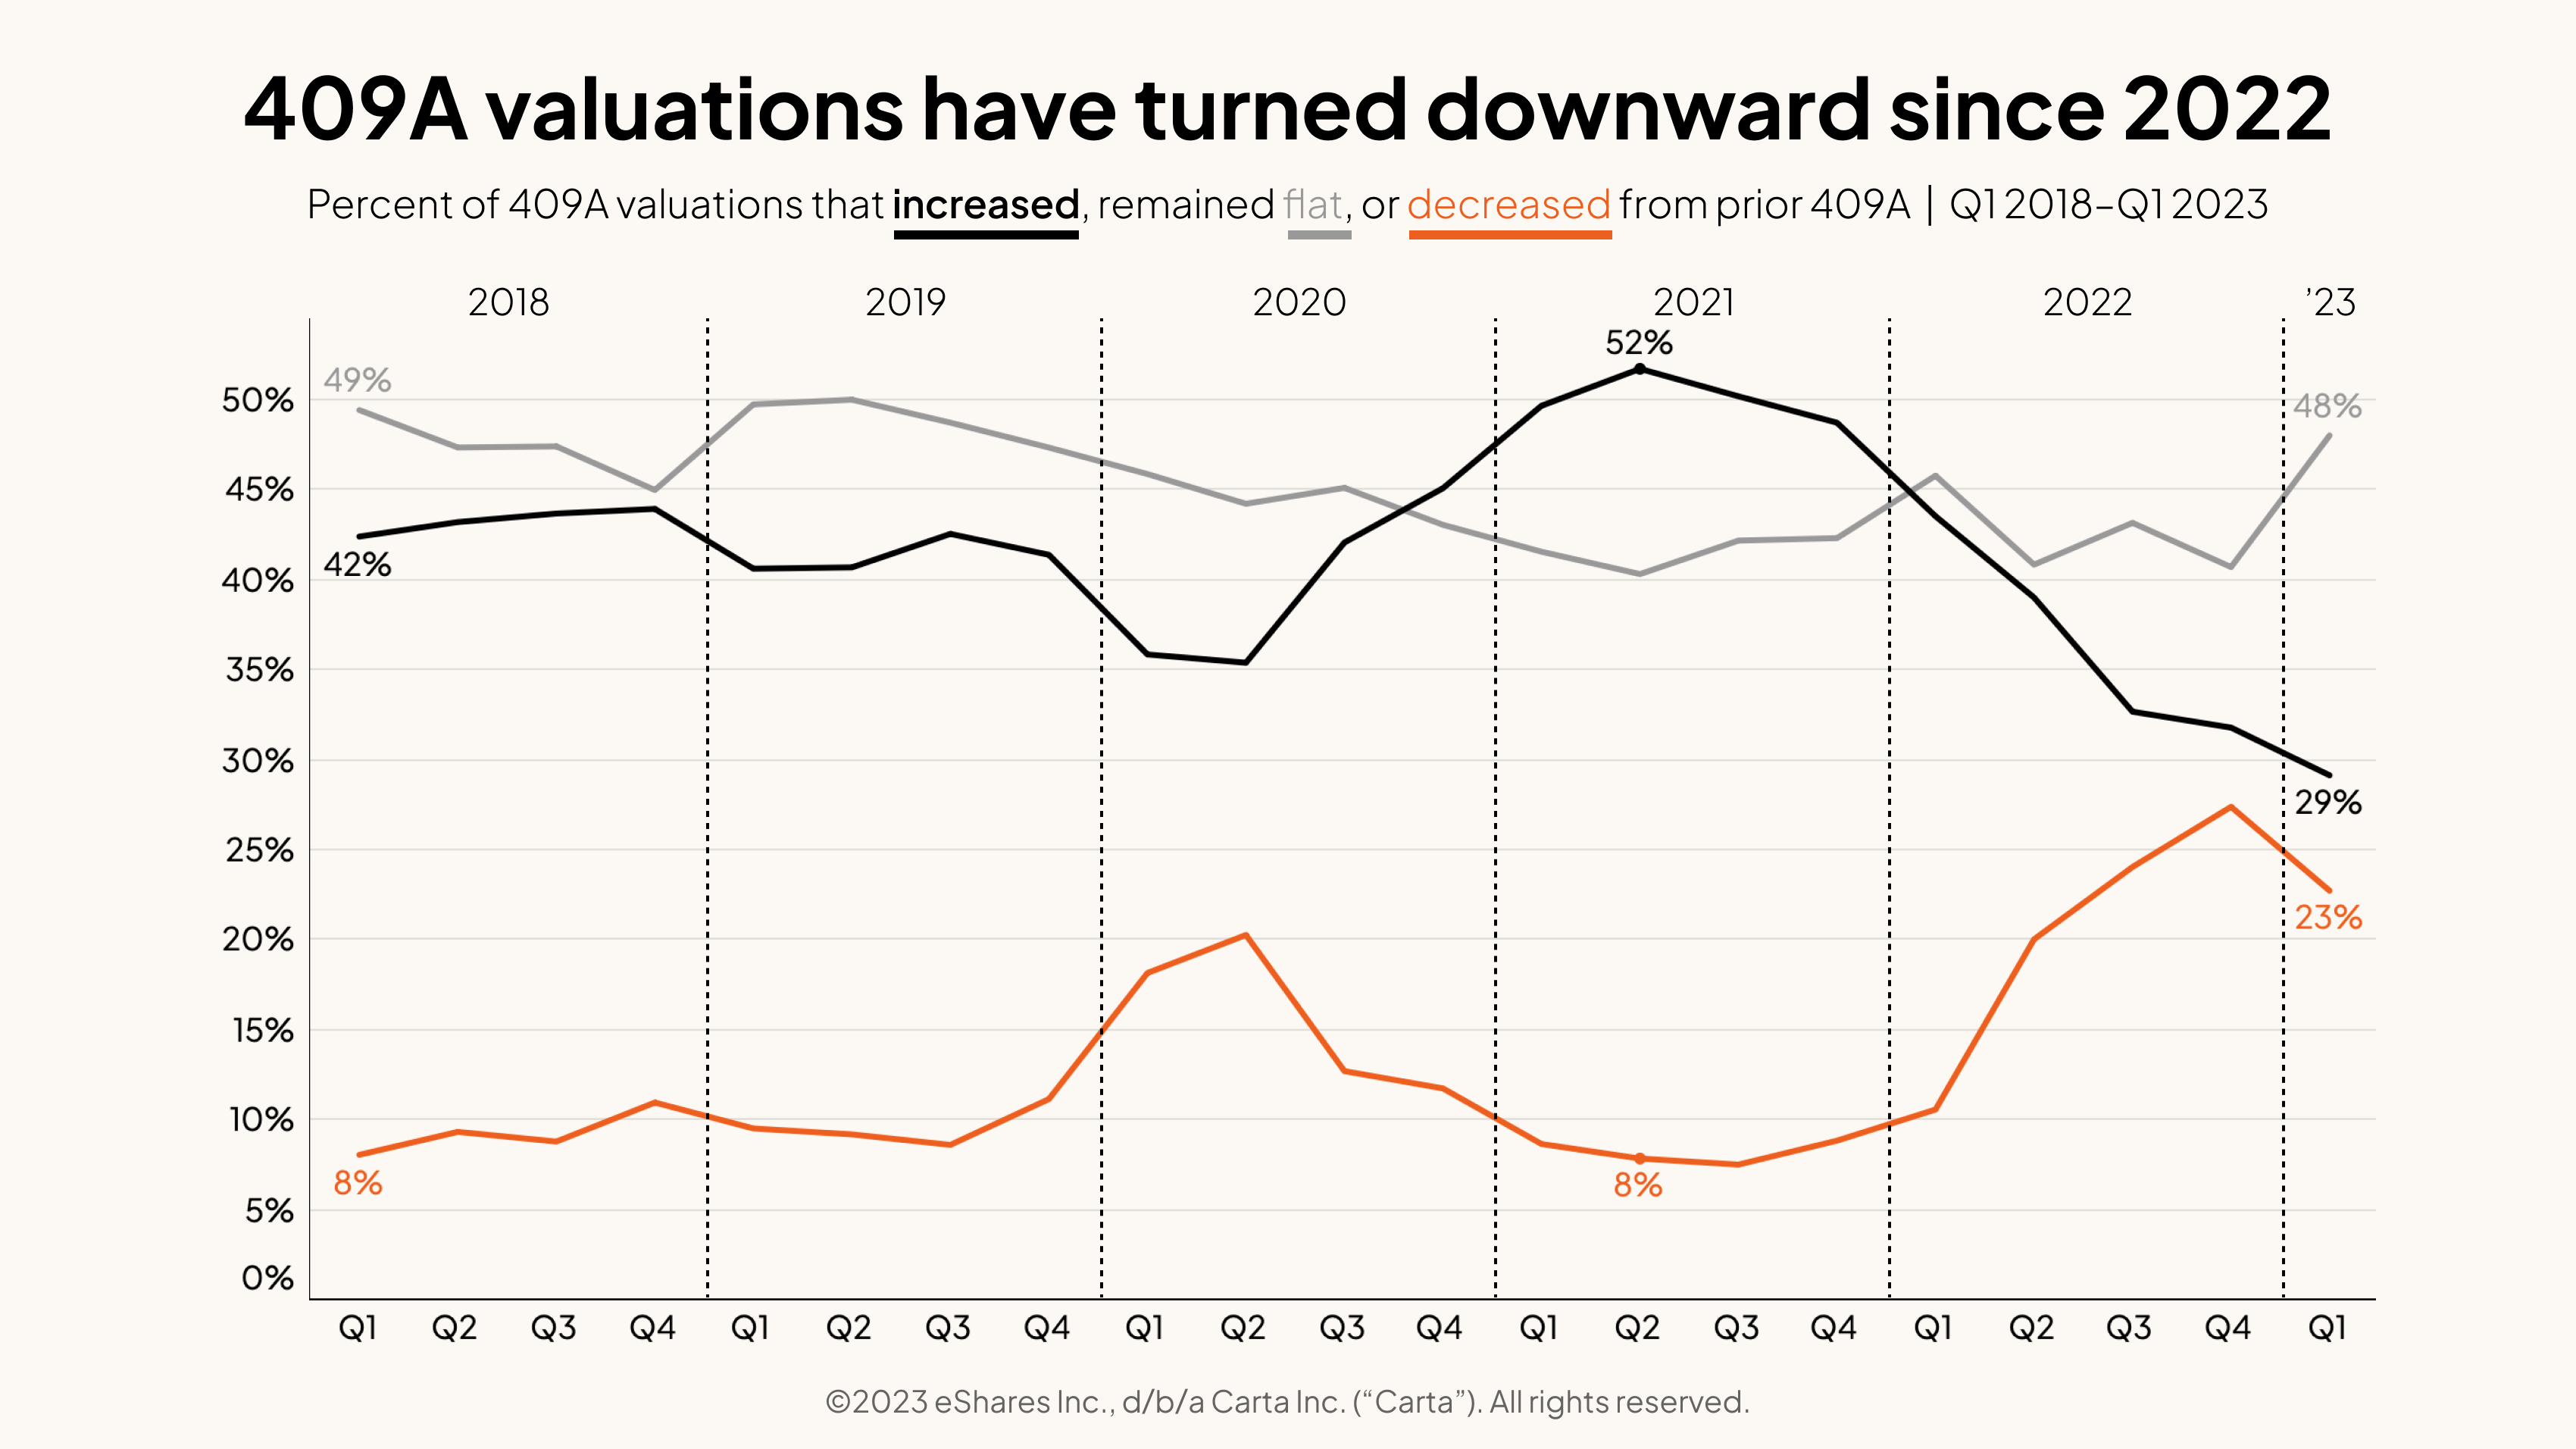 409A valuations have turned downward since 2022